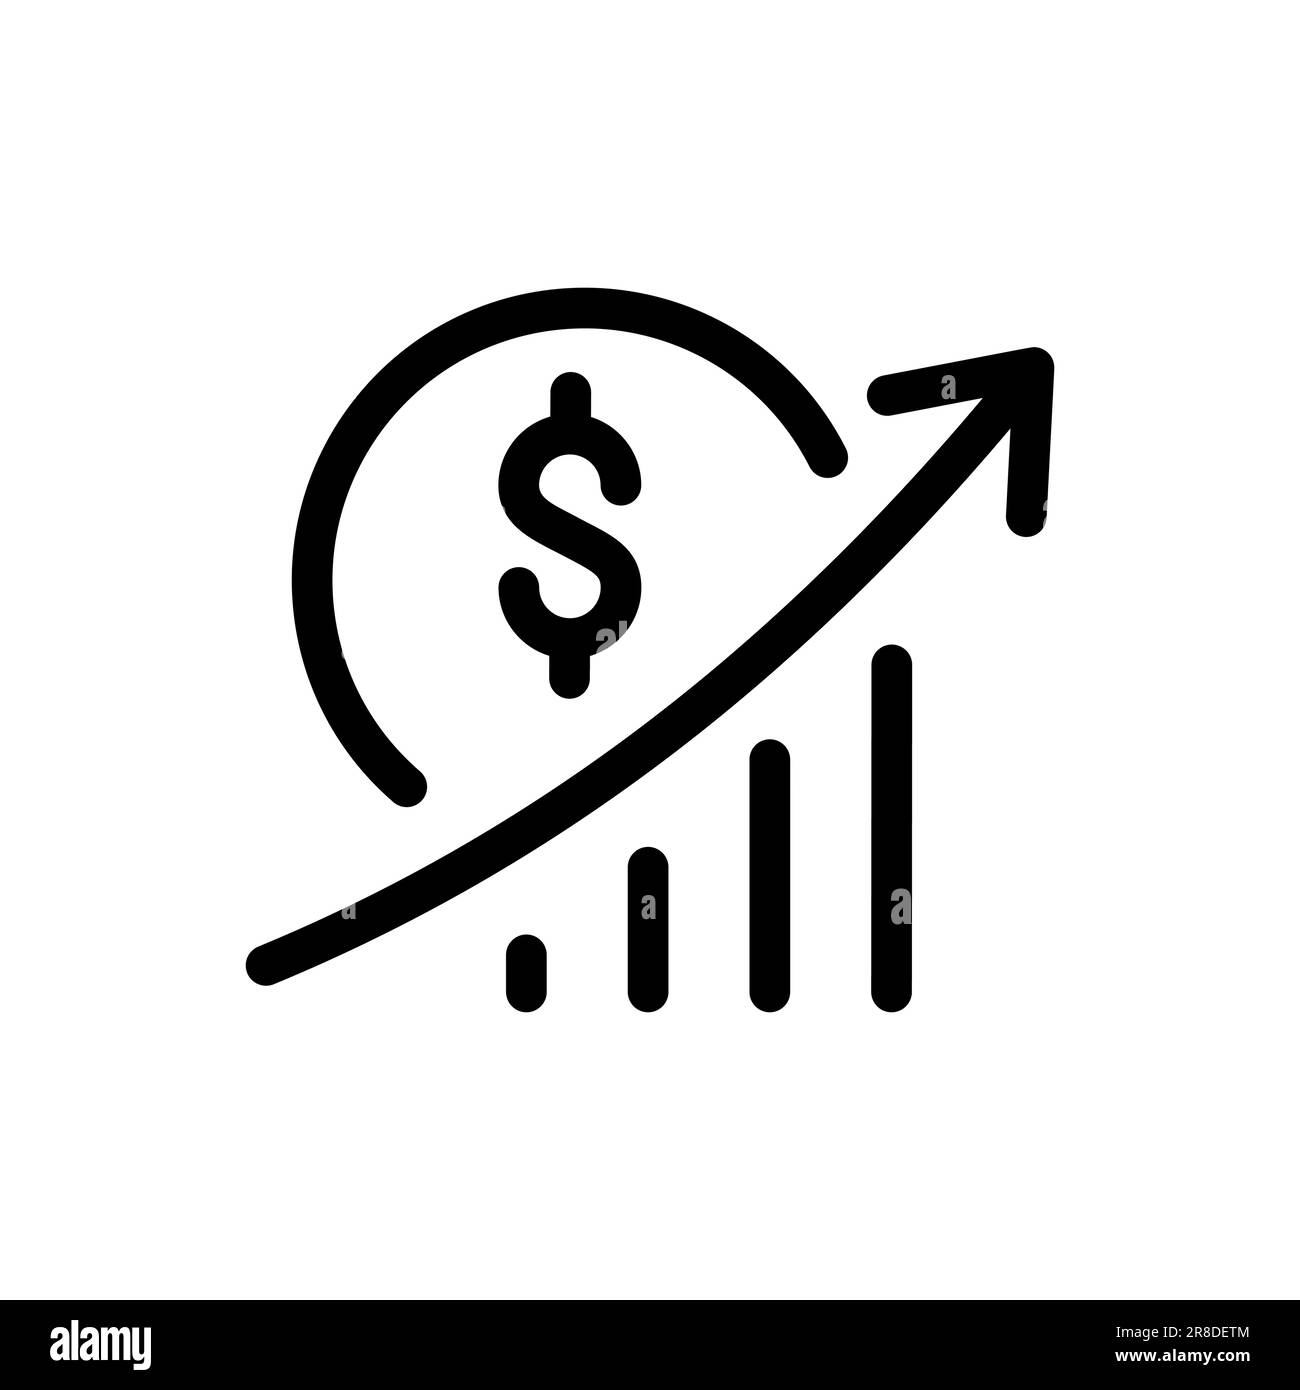 Growth vector diagram logo icon with sign dollar and arrow going up. Vector line icon isolated on white background. Success business finance Stock Vector